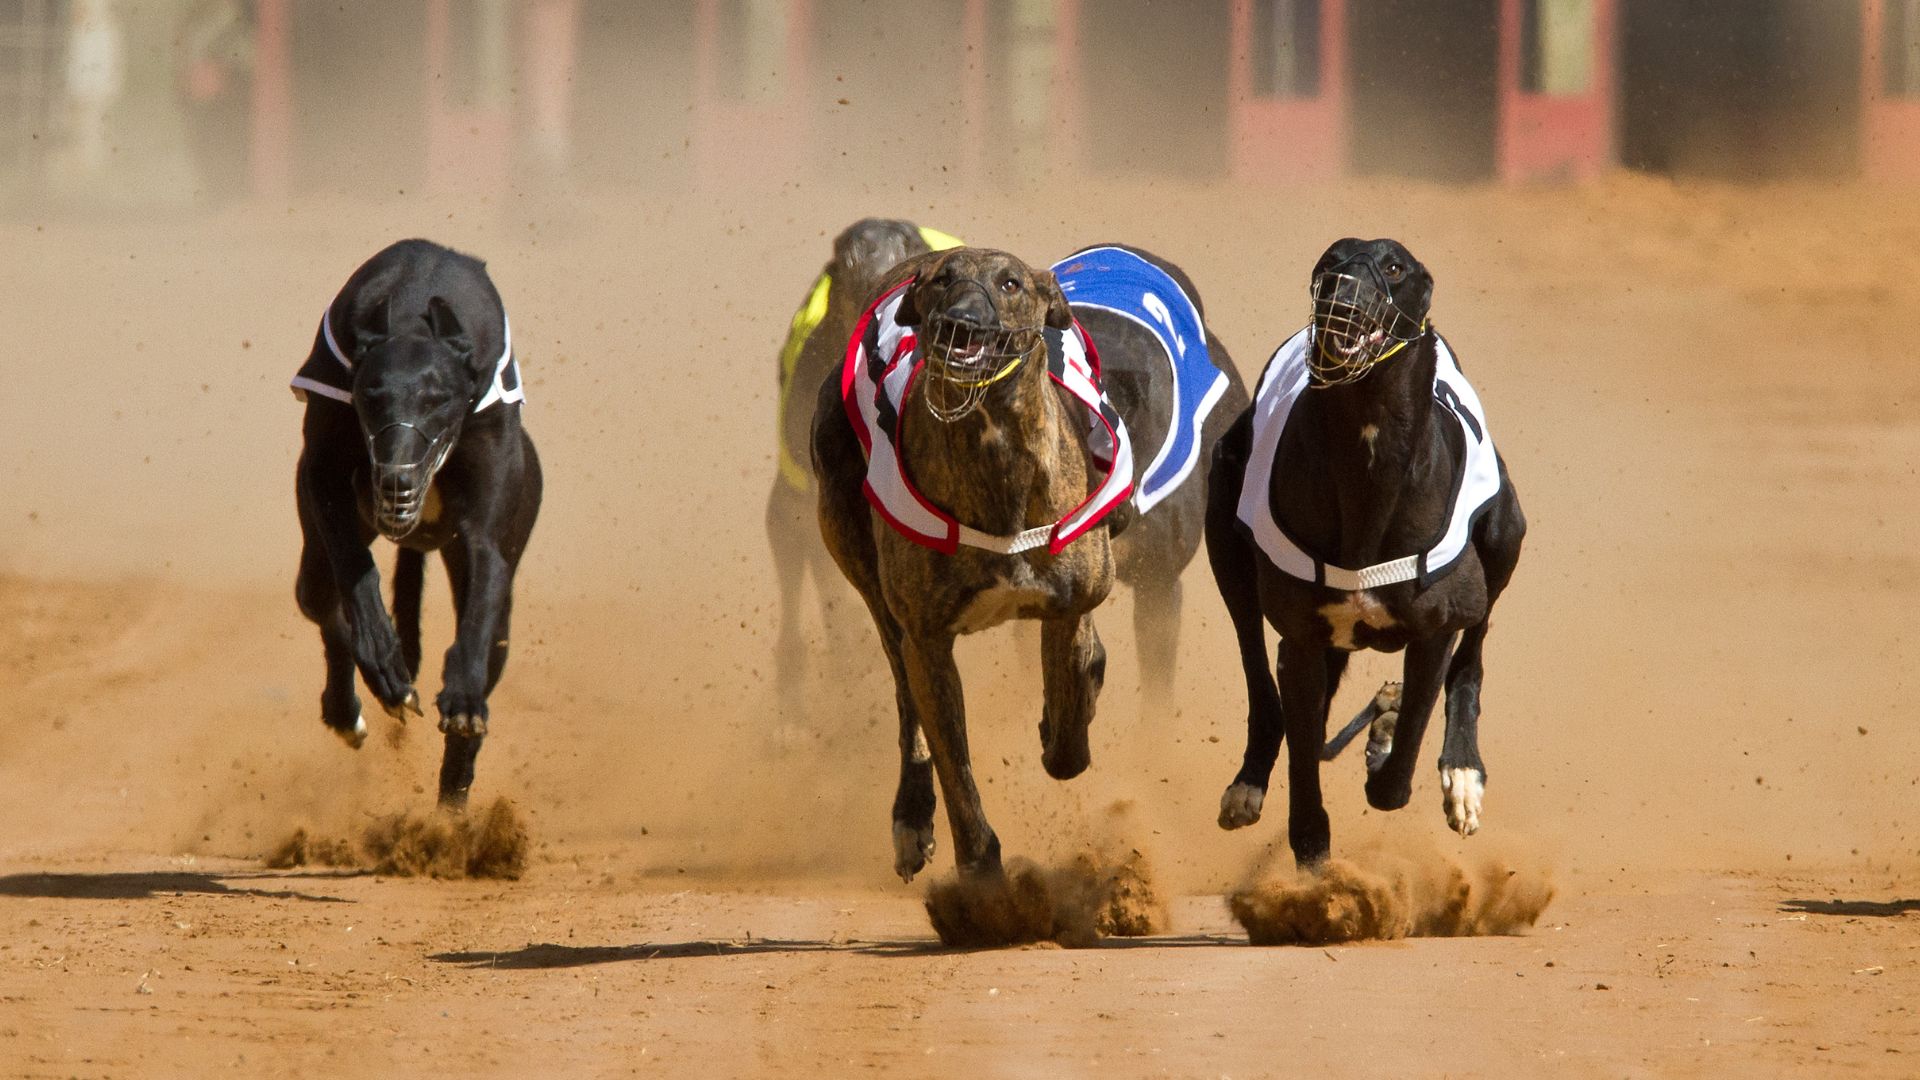 This surgical procedure to impregnate greyhounds in Australia is a major animal welfare issue 